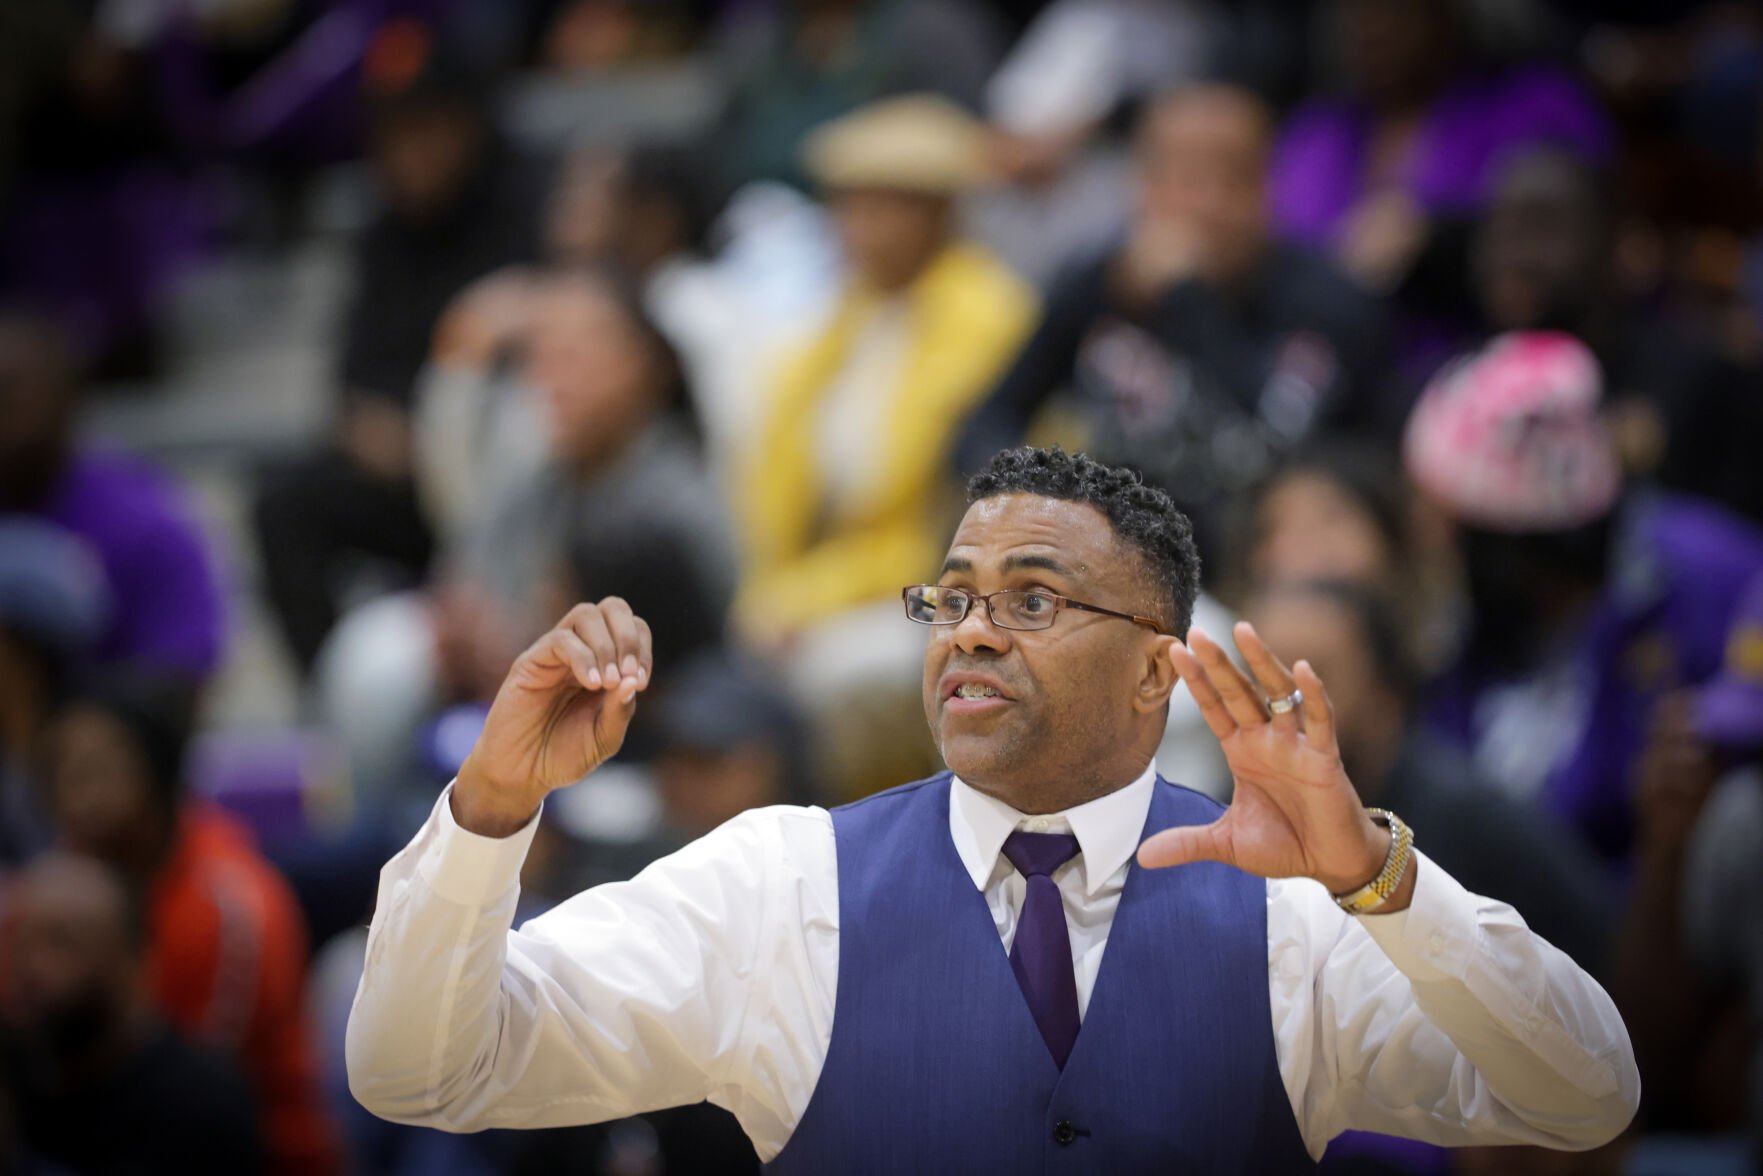 Basketball coach resigns from St. Augustine and says what he would like to do next